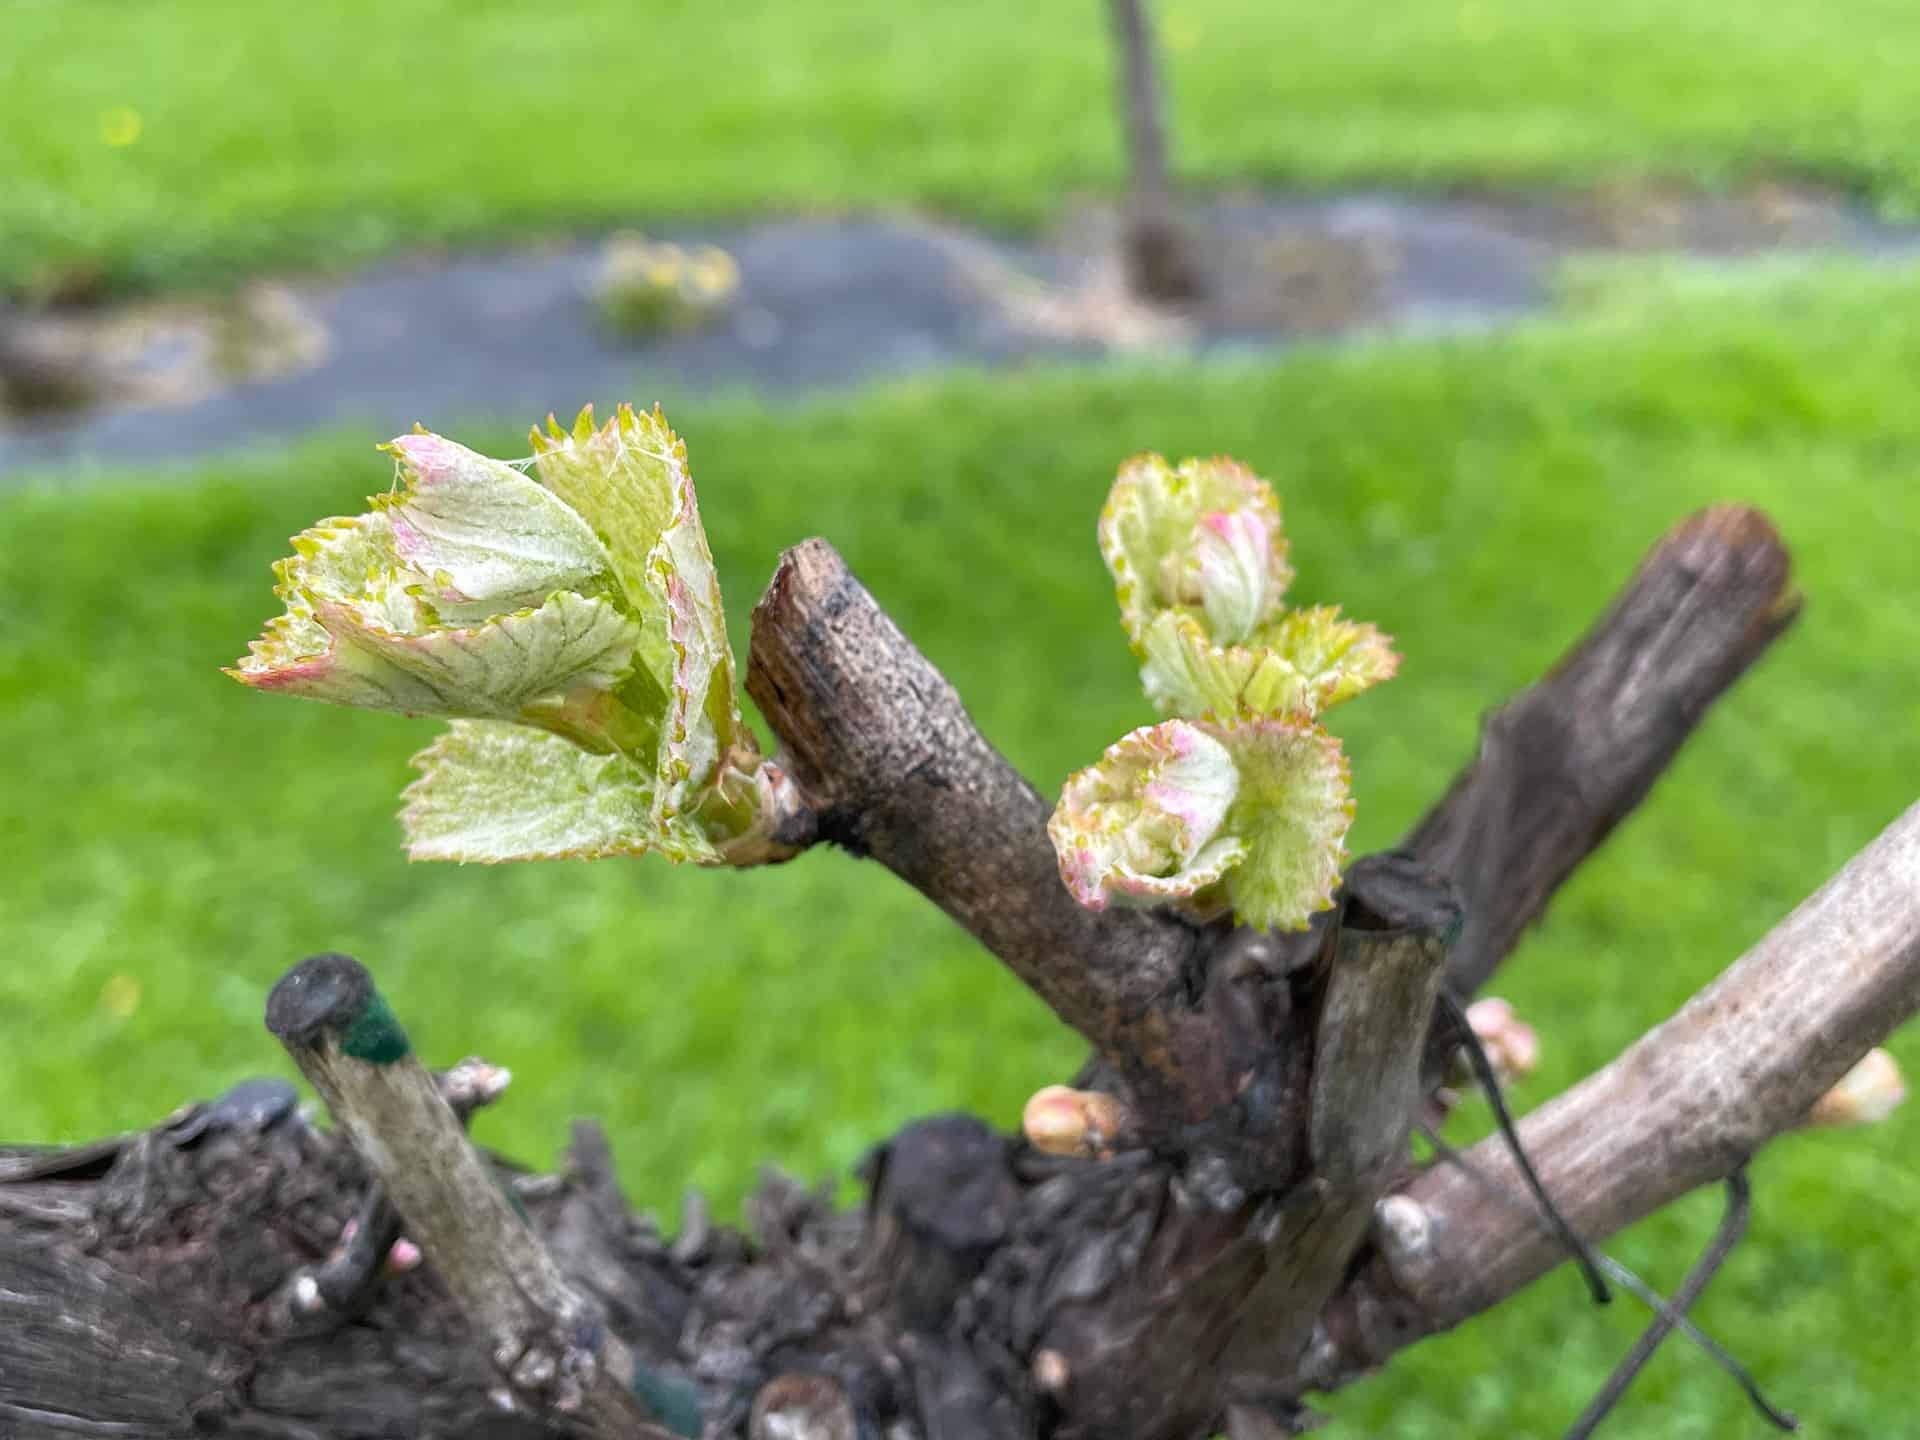 New Life on the Vines